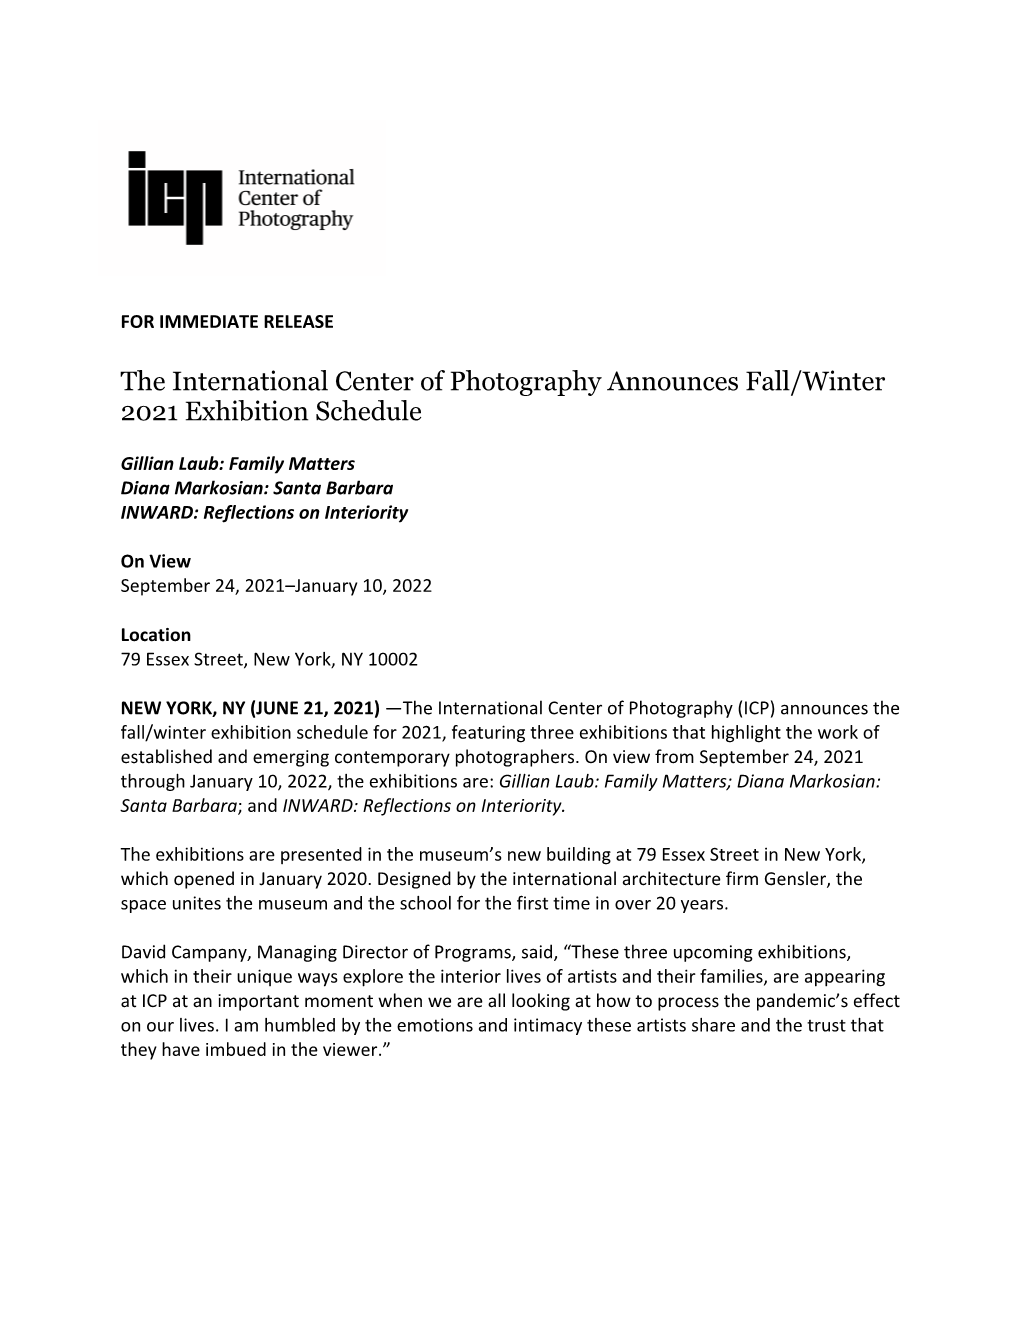 The International Center of Photography Announces Fall/Winter 2021 Exhibition Schedule